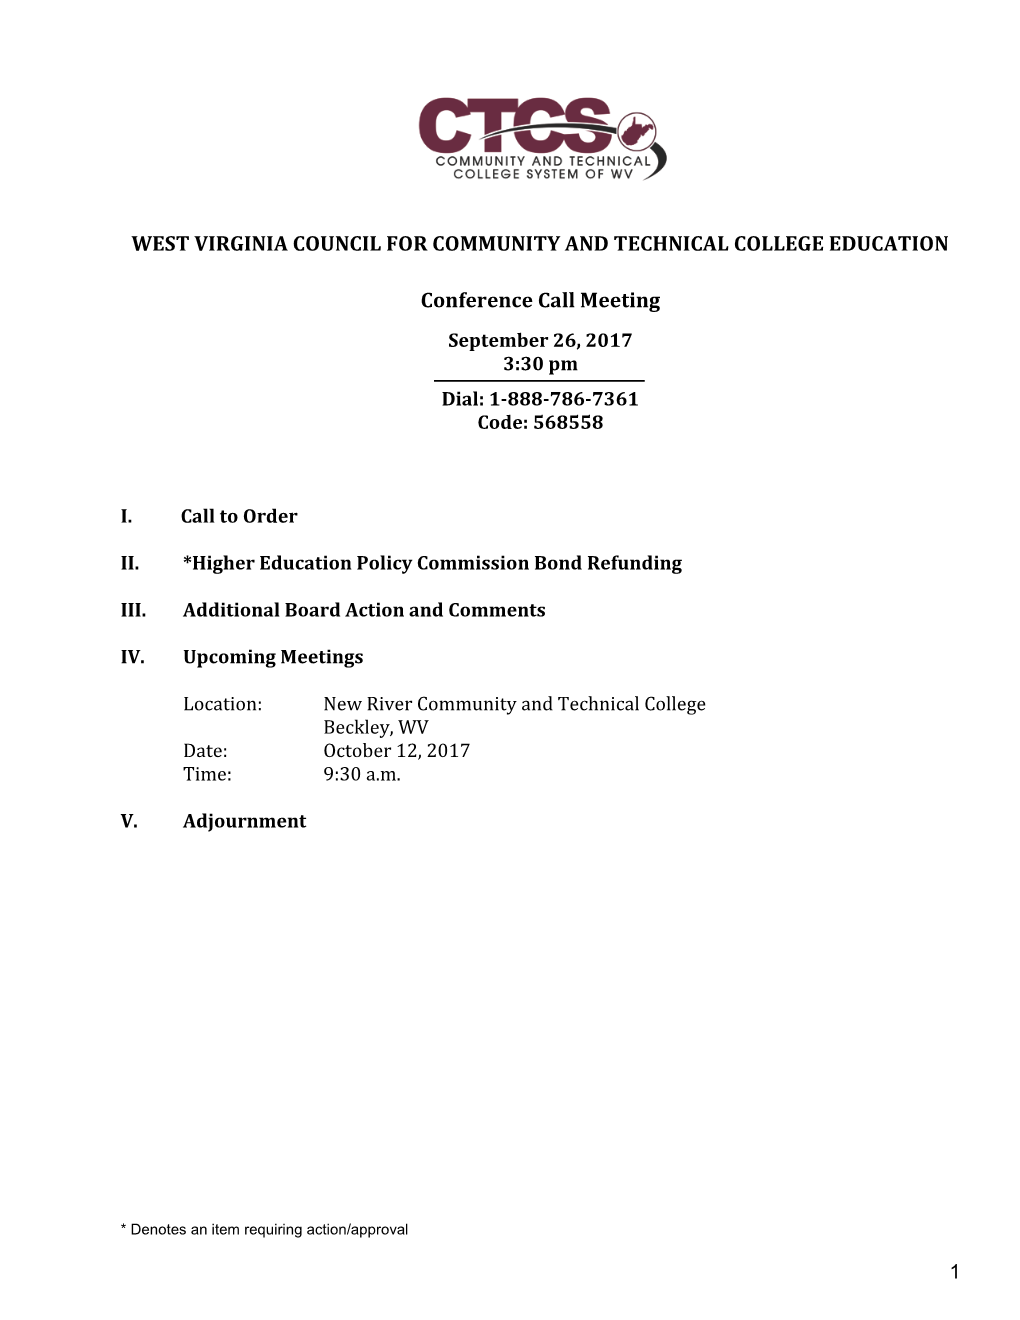 West Virginia Council for Community and Technical College Education